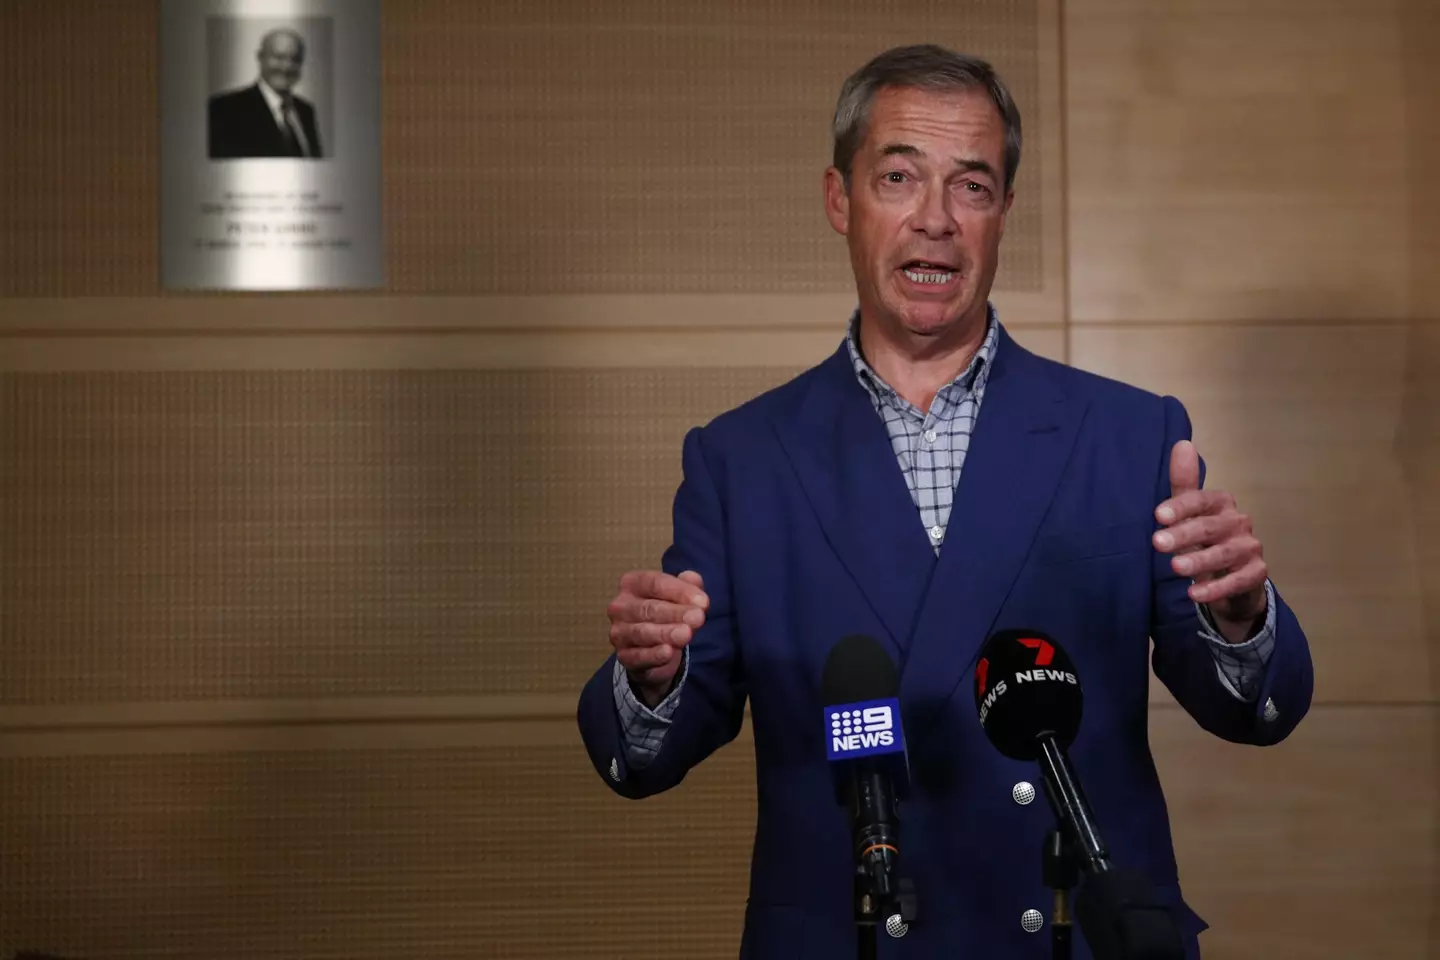 Nigel Farage is likely to be a controversial campmate.